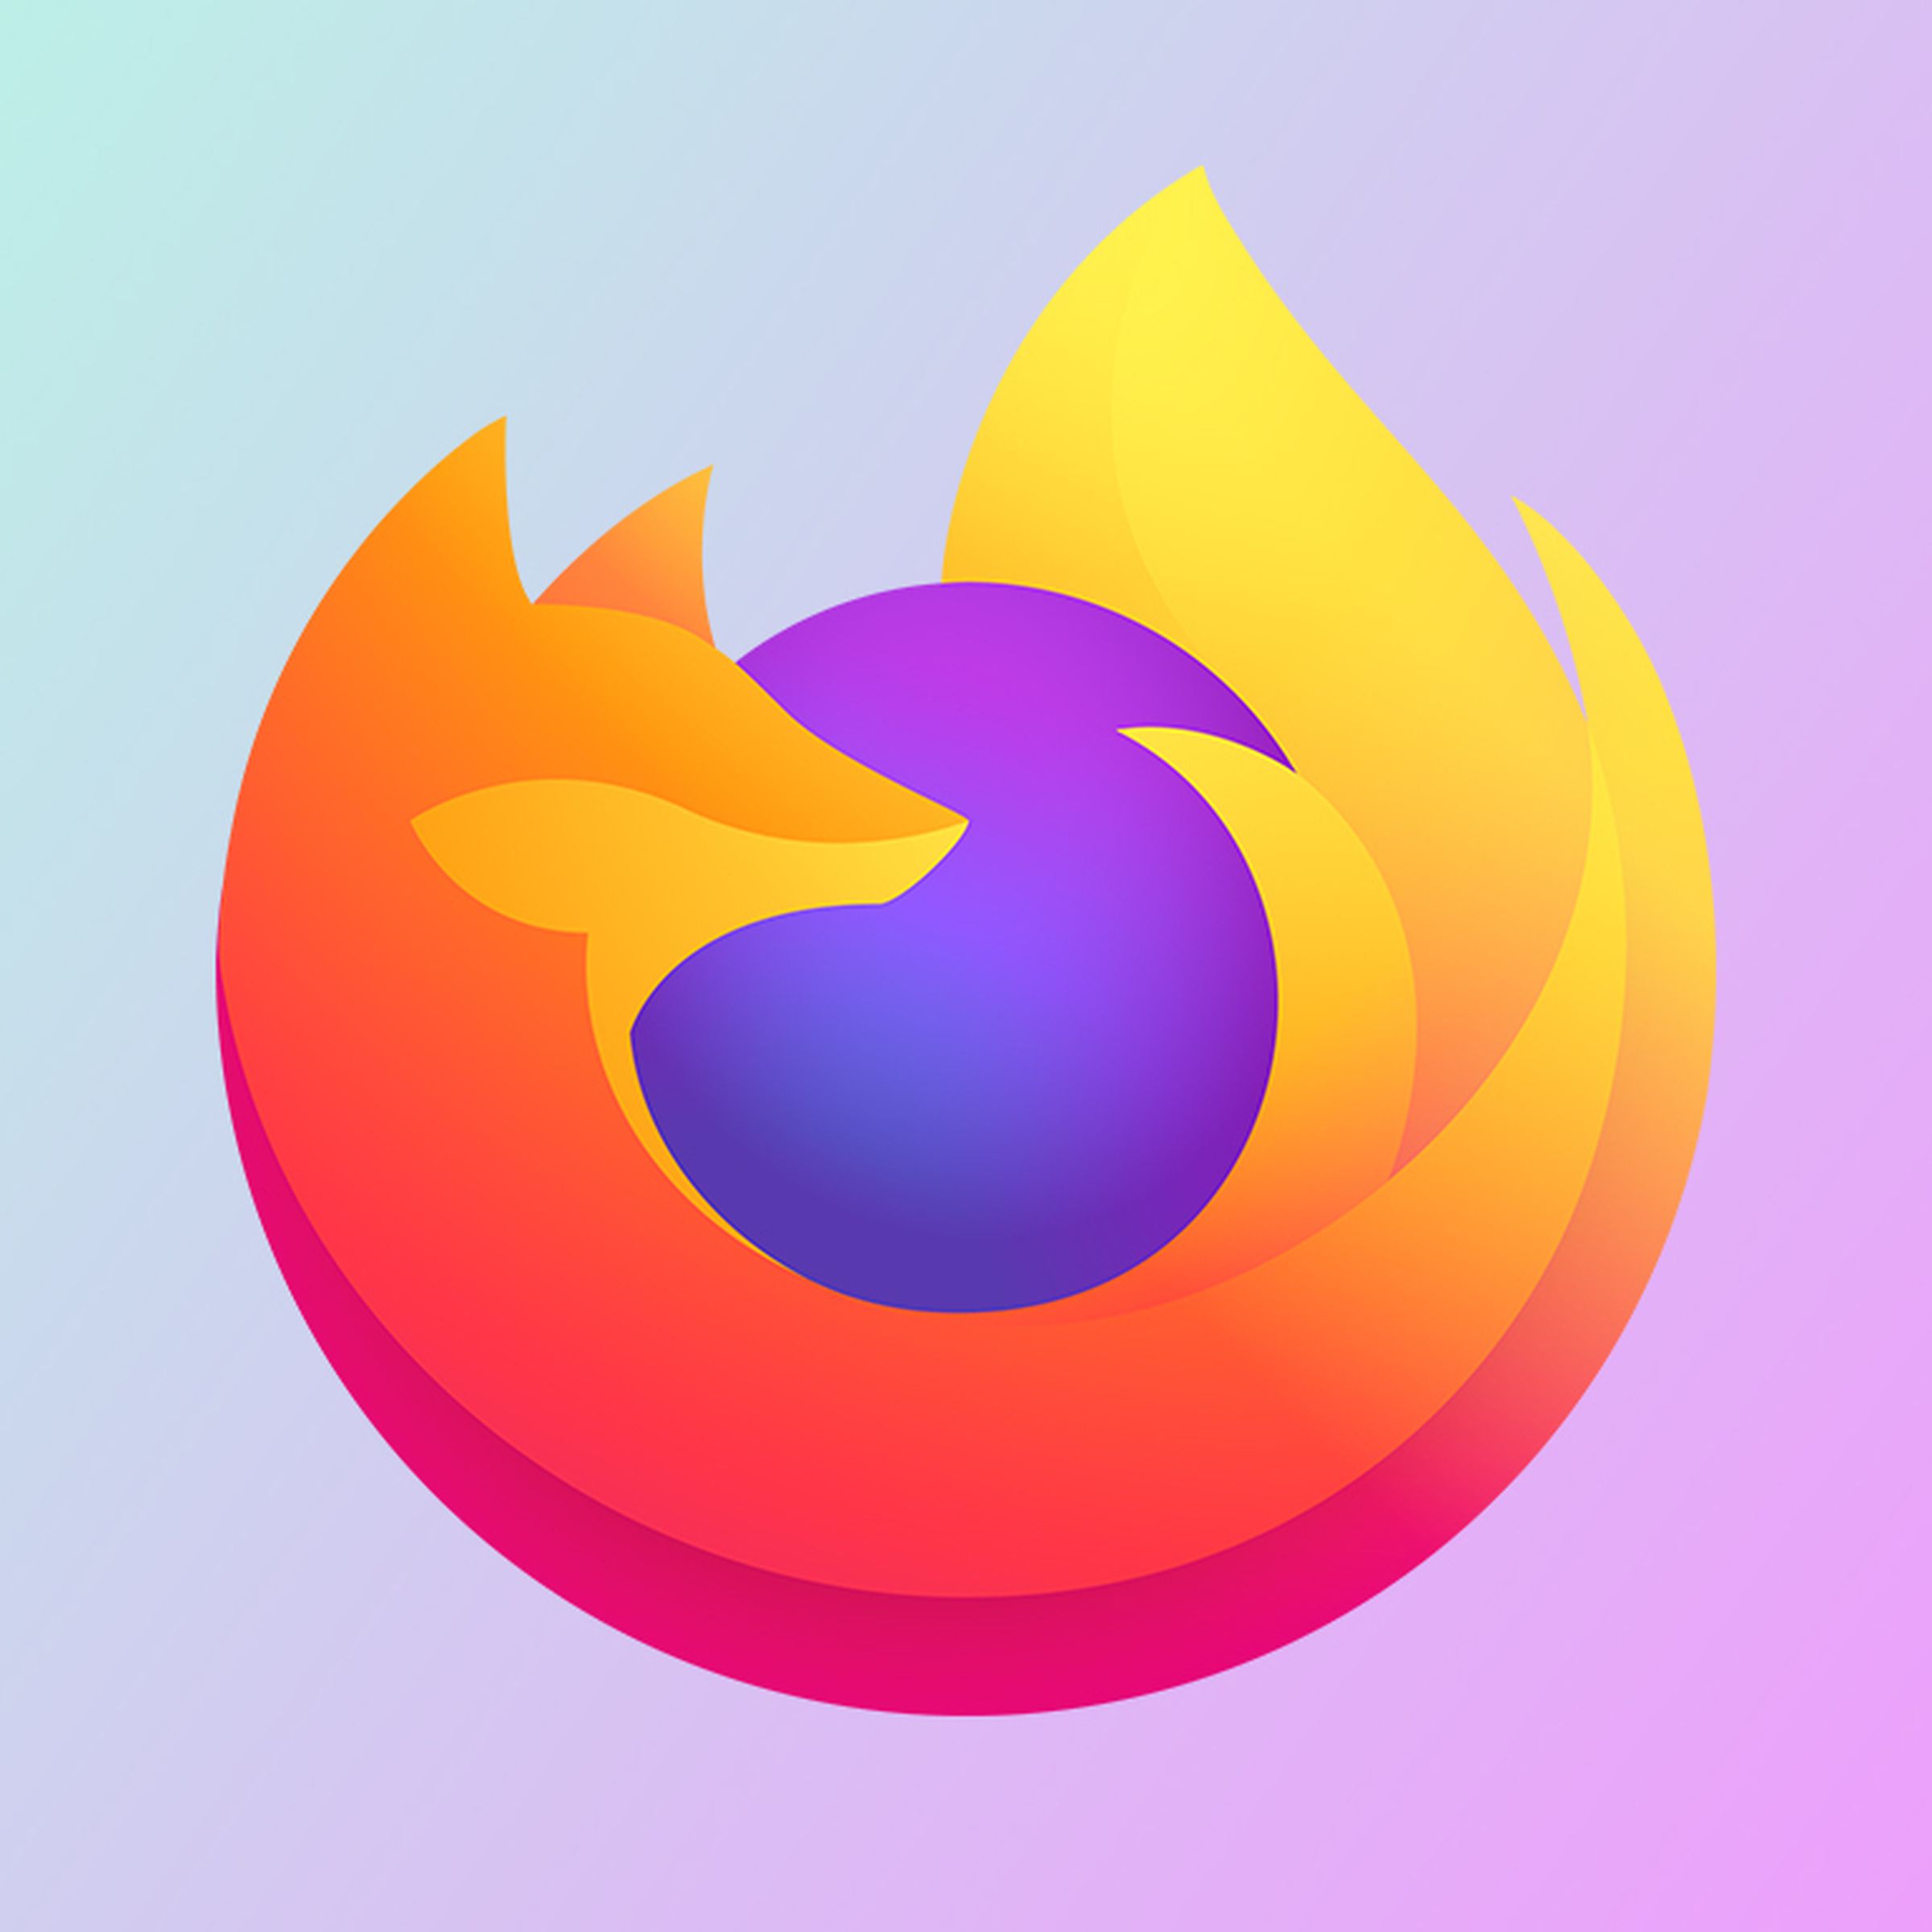 An image showing the Firefox logo on a gradient background